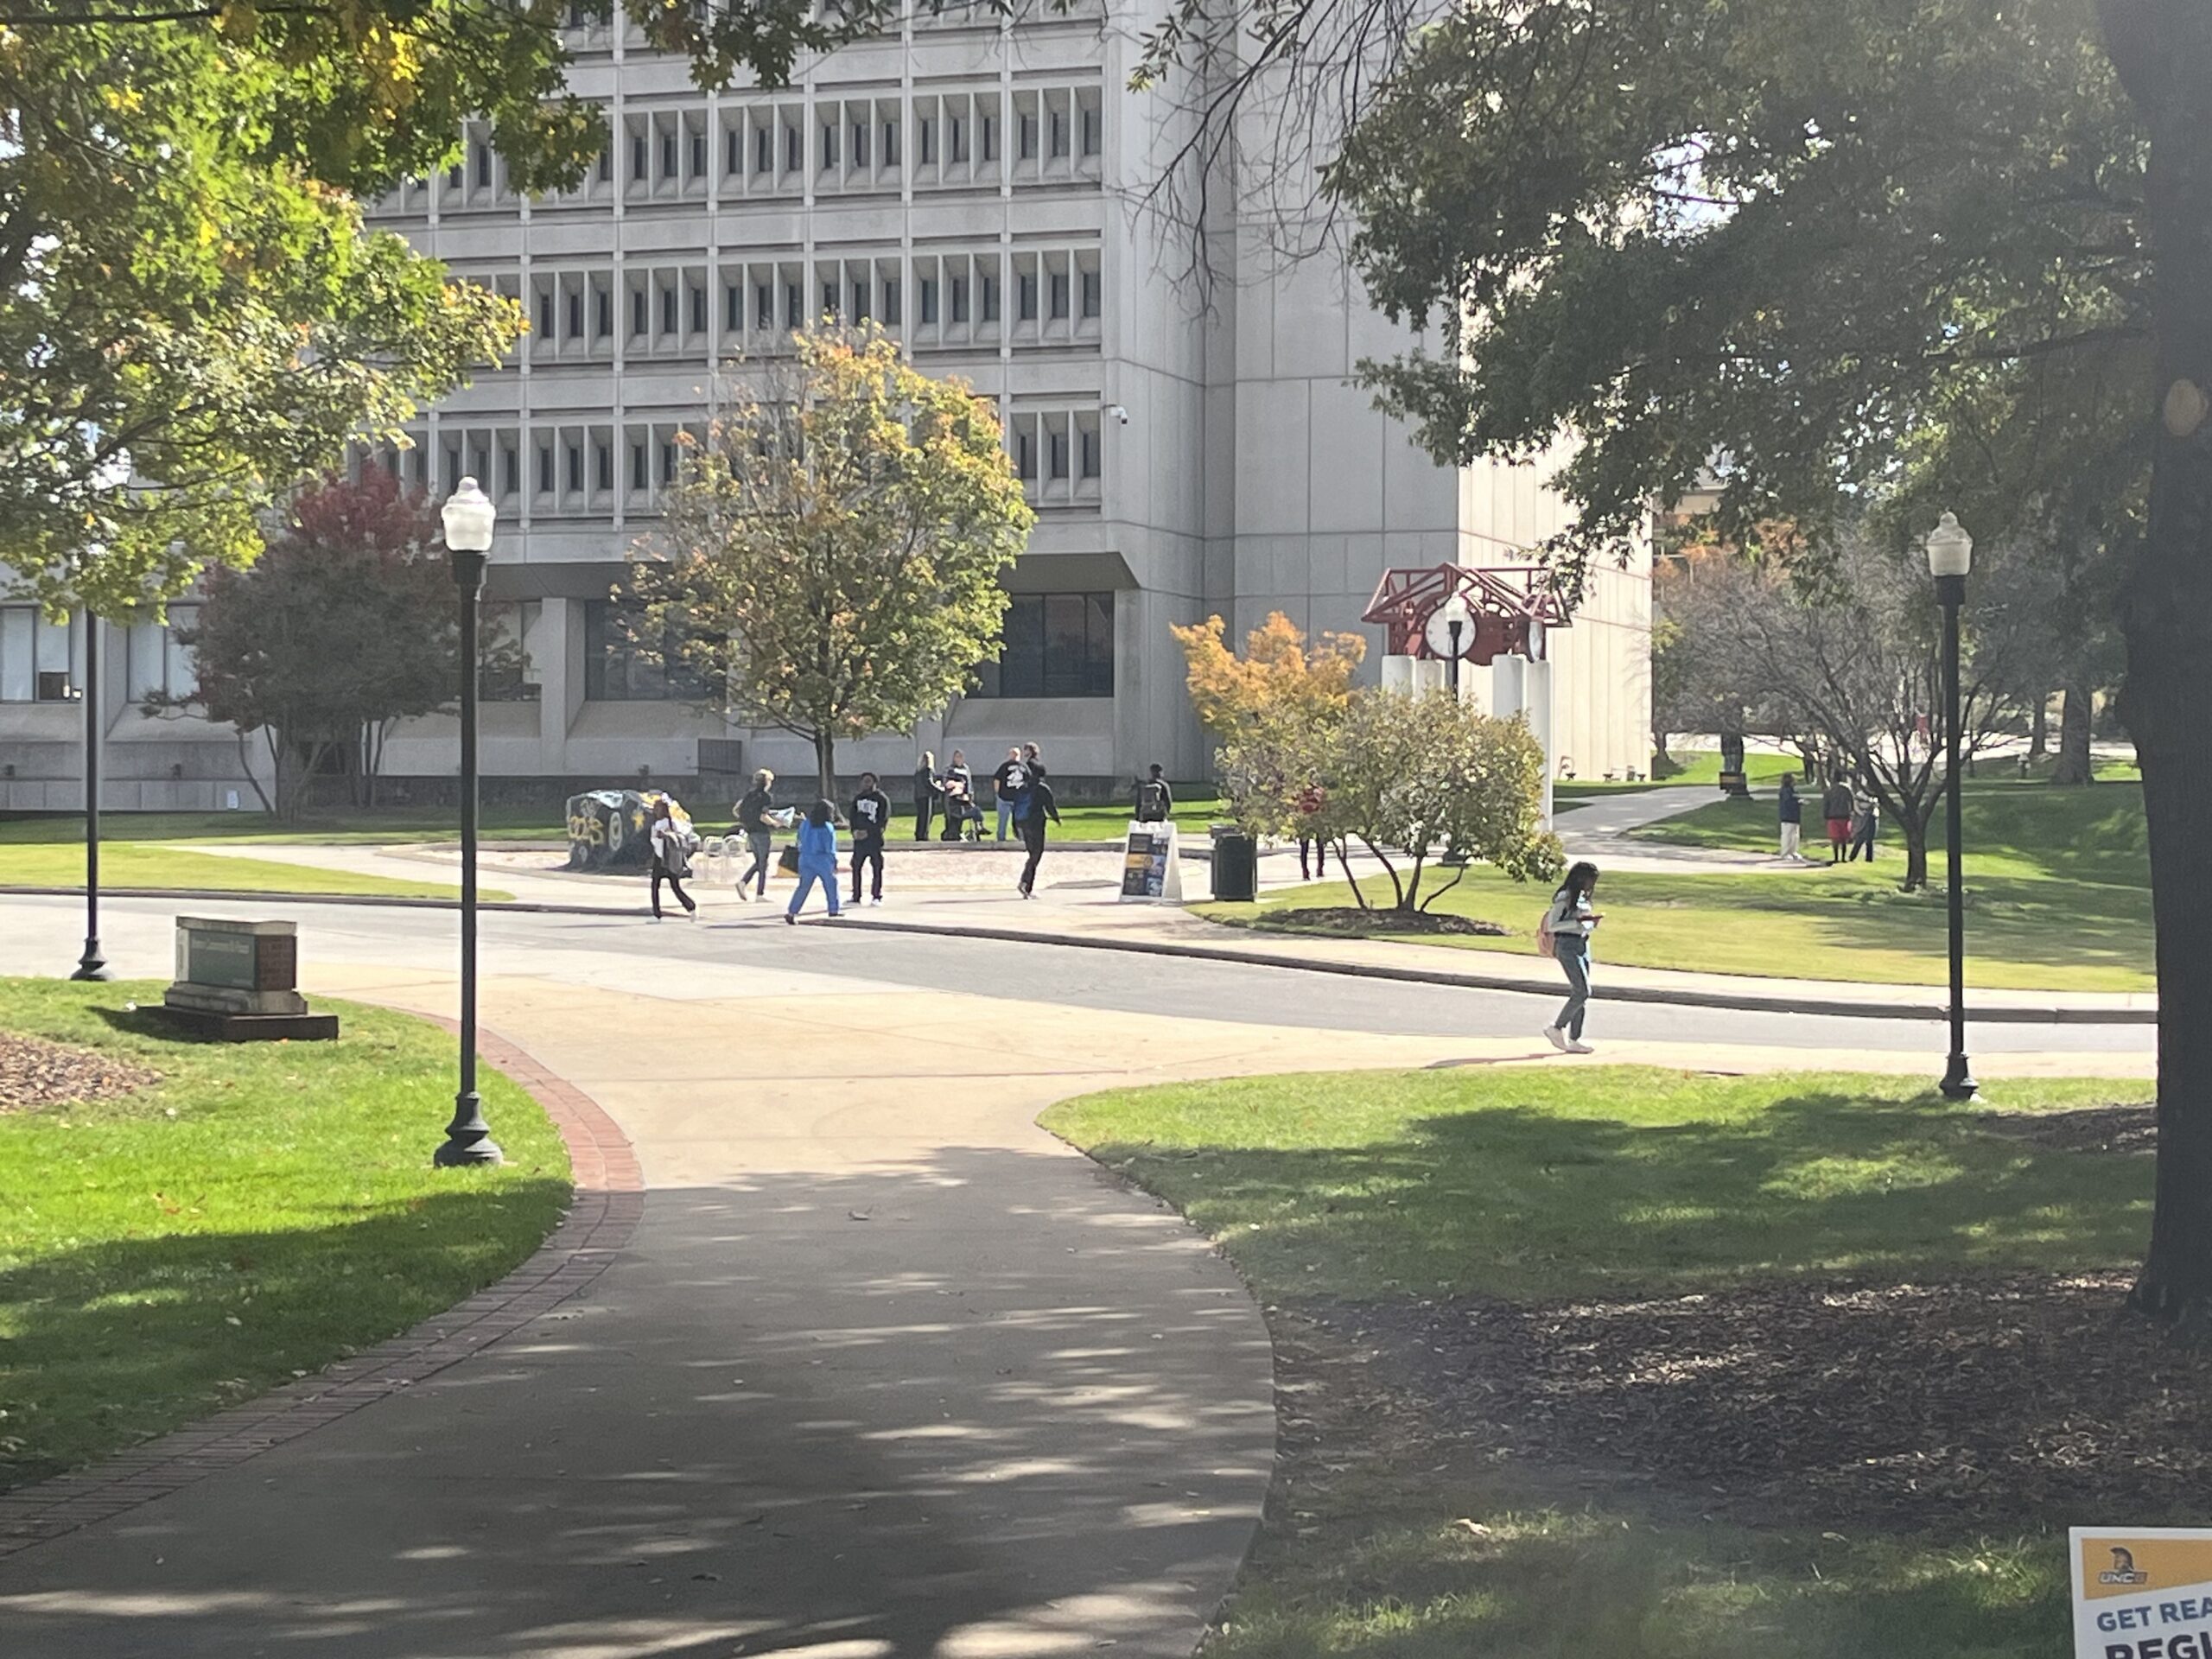 Image, taken from a distance, of students walking in front of the library.